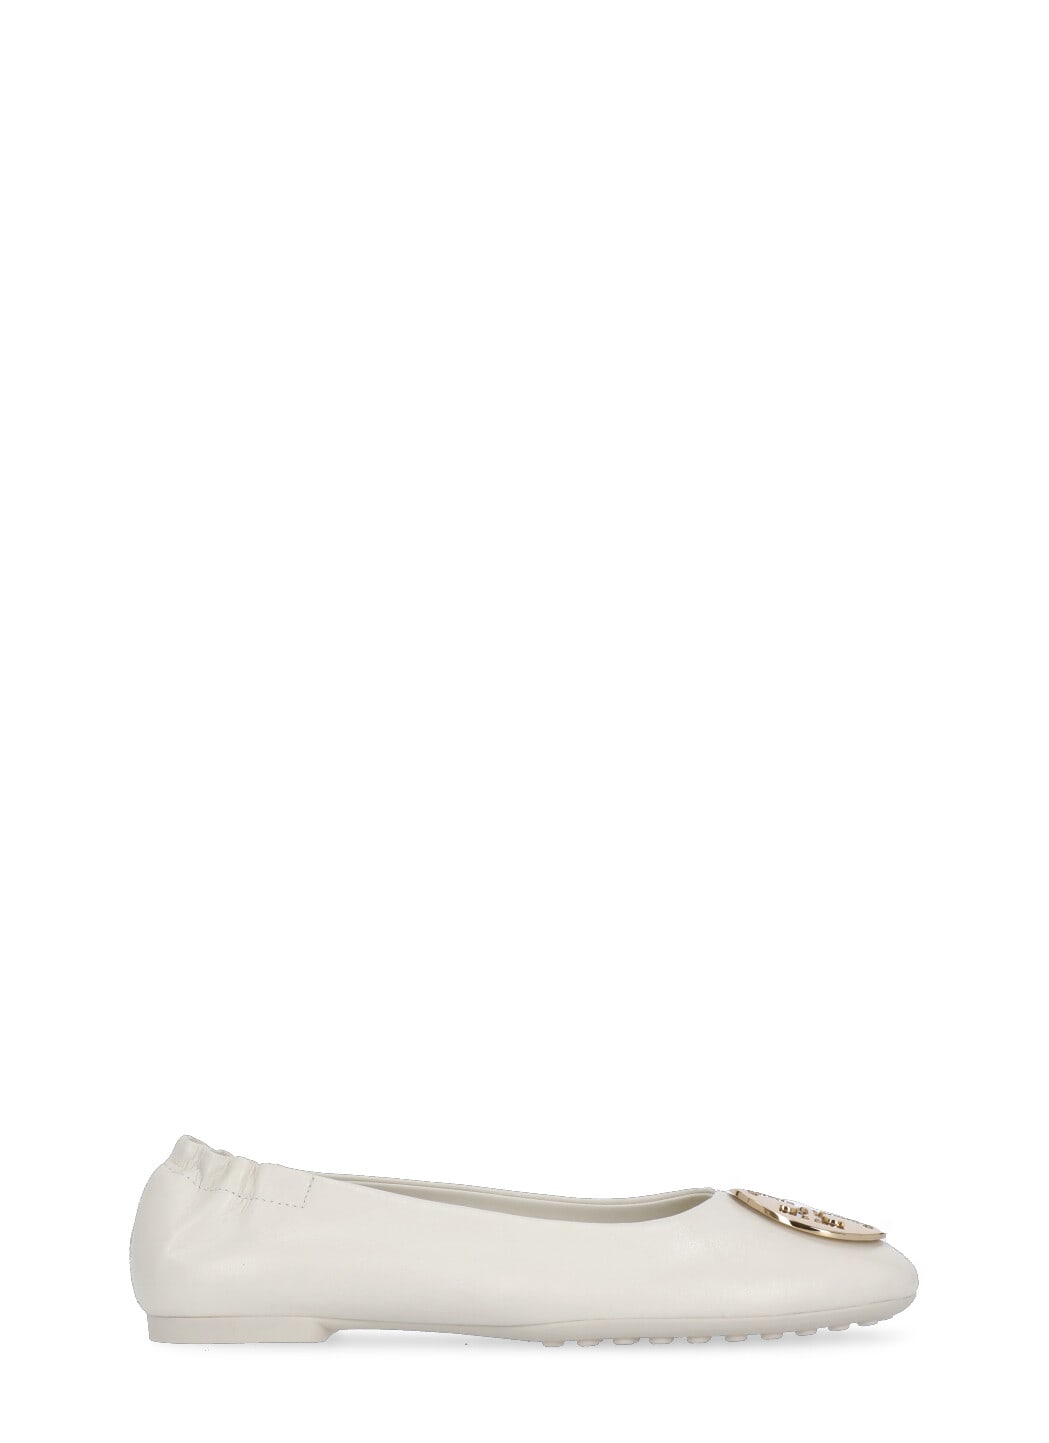 TORY BURCH CLAIRE BALLET